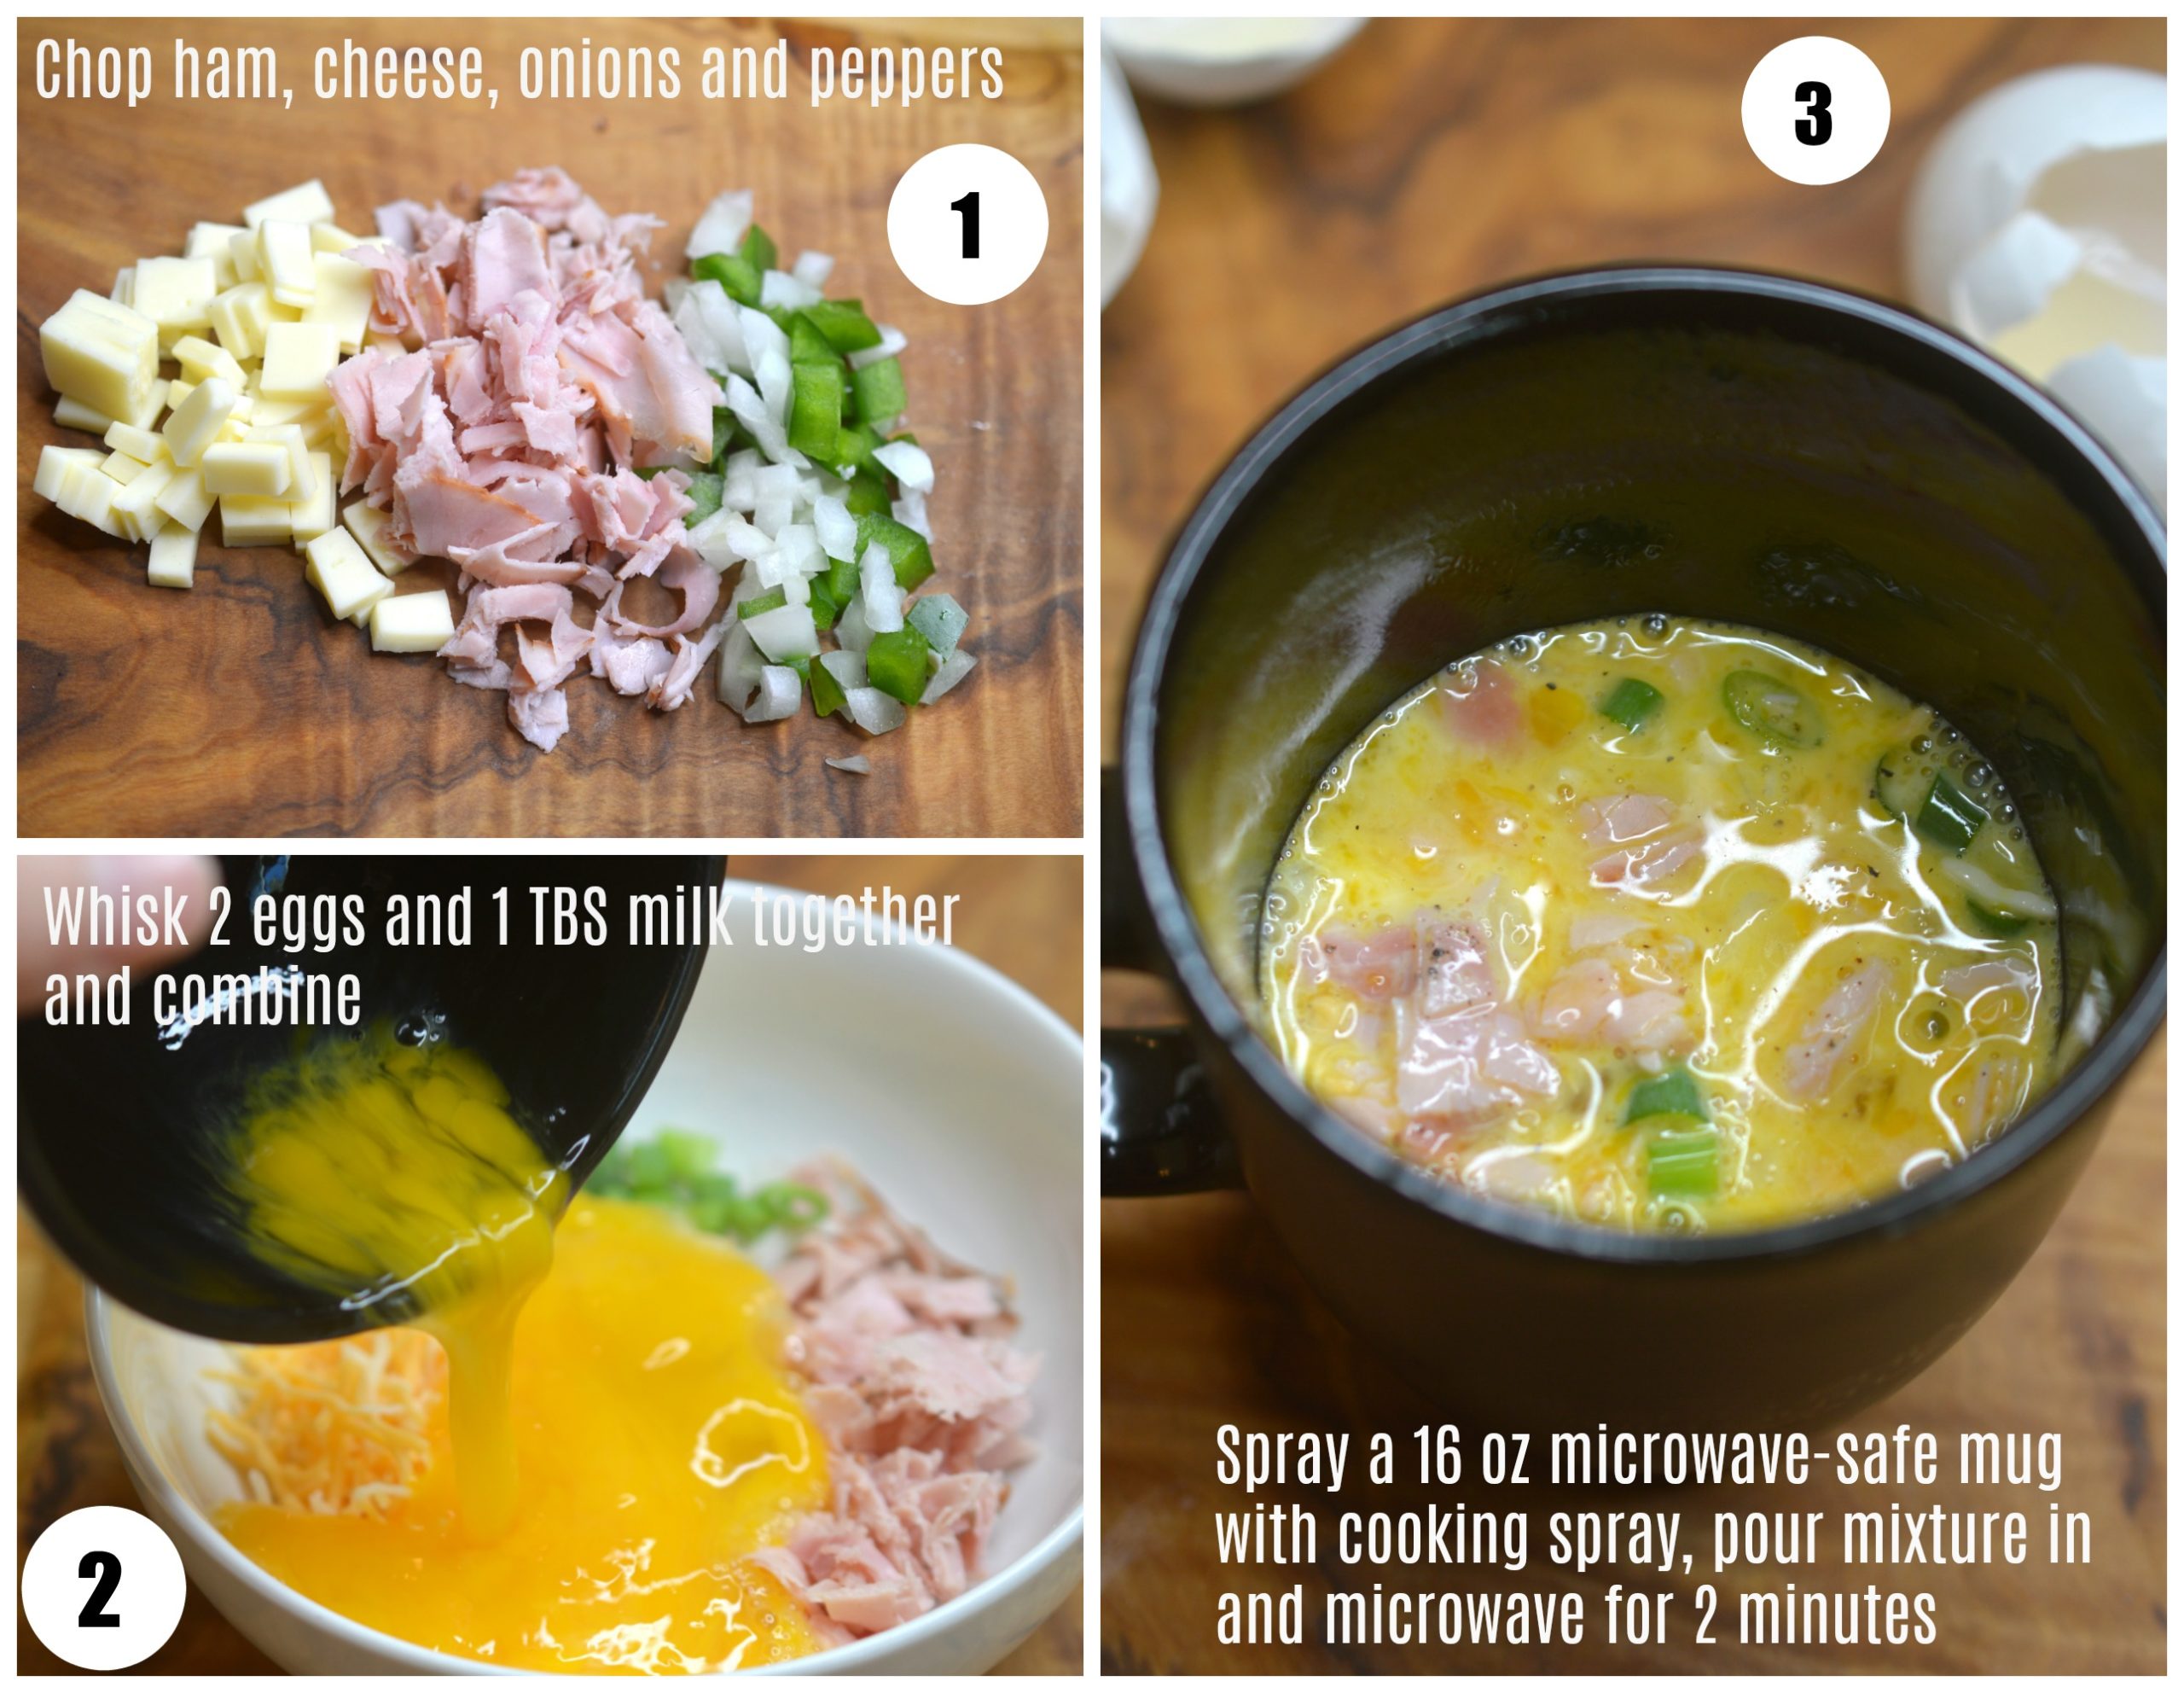 How To Make a 5 Minute Microwave Omelet